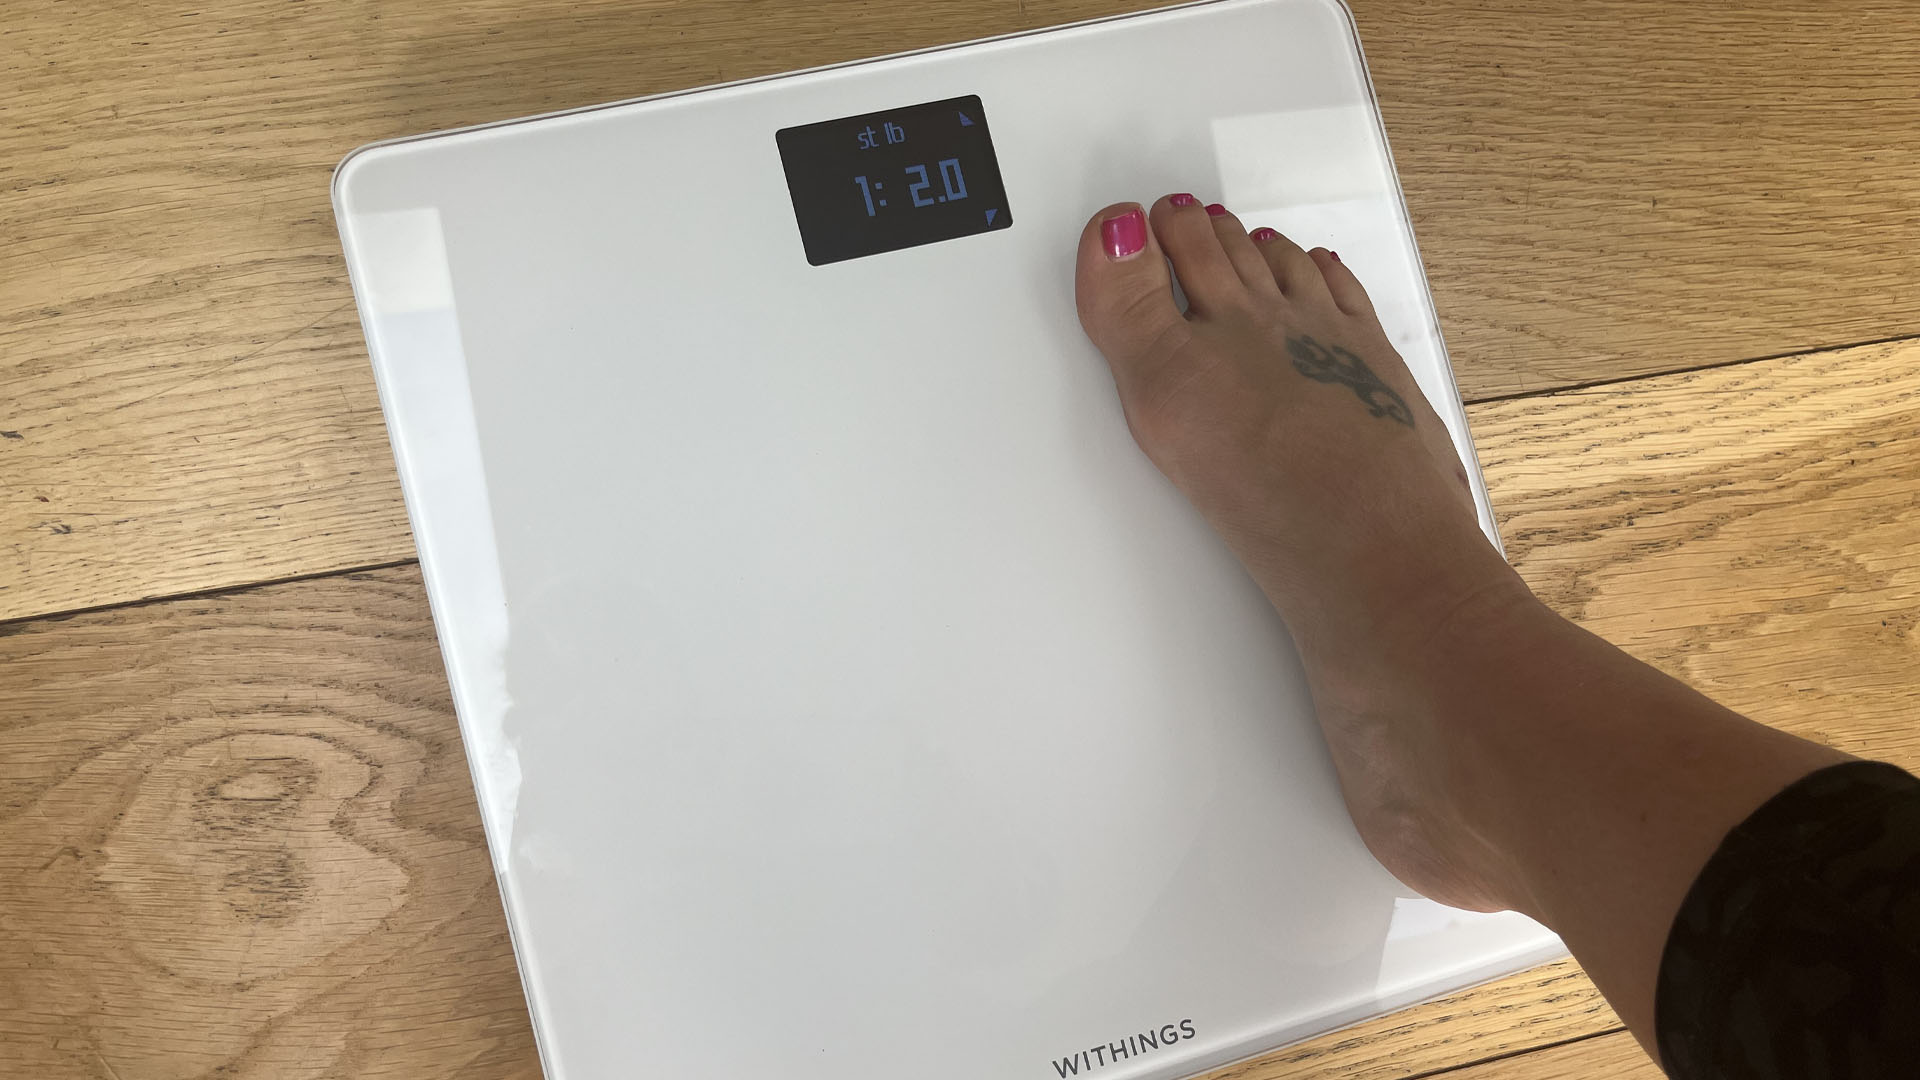 Withings Body smart scale being used by Live Science contributor Maddy Bidulph